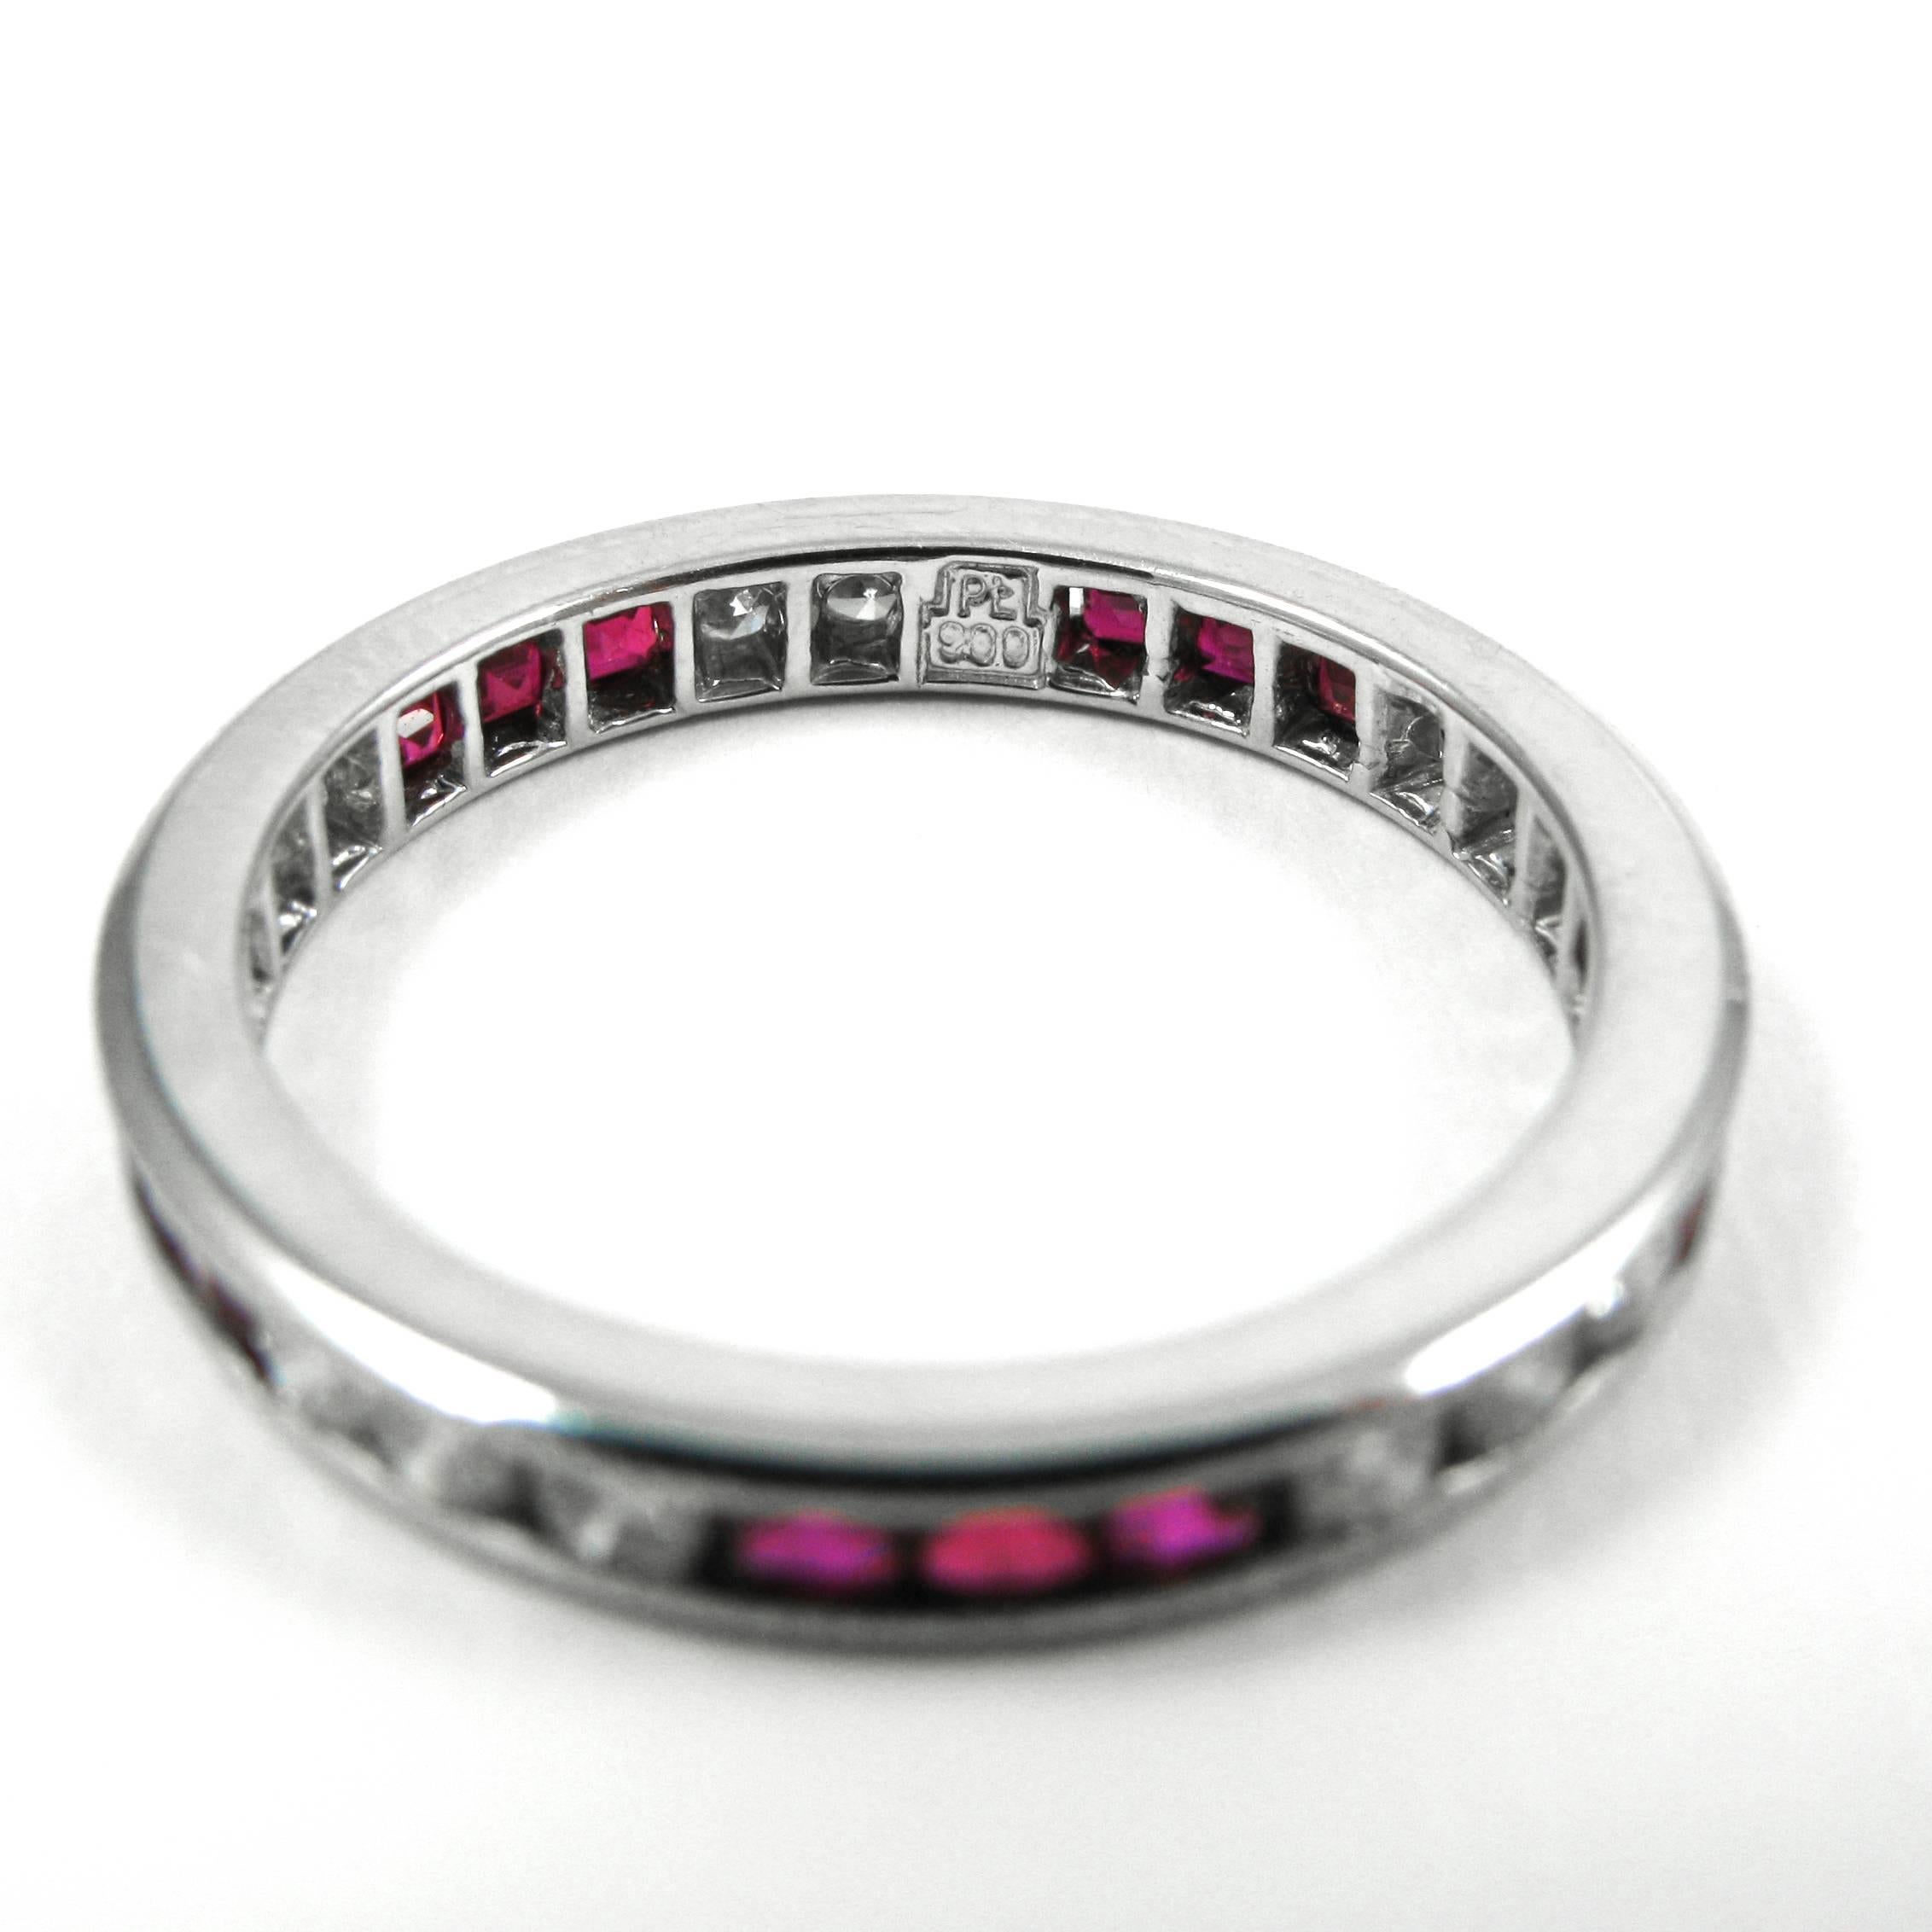 This lovely, vintage diamond & ruby eternity band is perfect for stacking! The platinum ring features 15 round-cut diamonds (approximately 0.75 ctw)  and 15 carré rubies channel-set in alternating sets of three with milgrain details. 

Ring size =